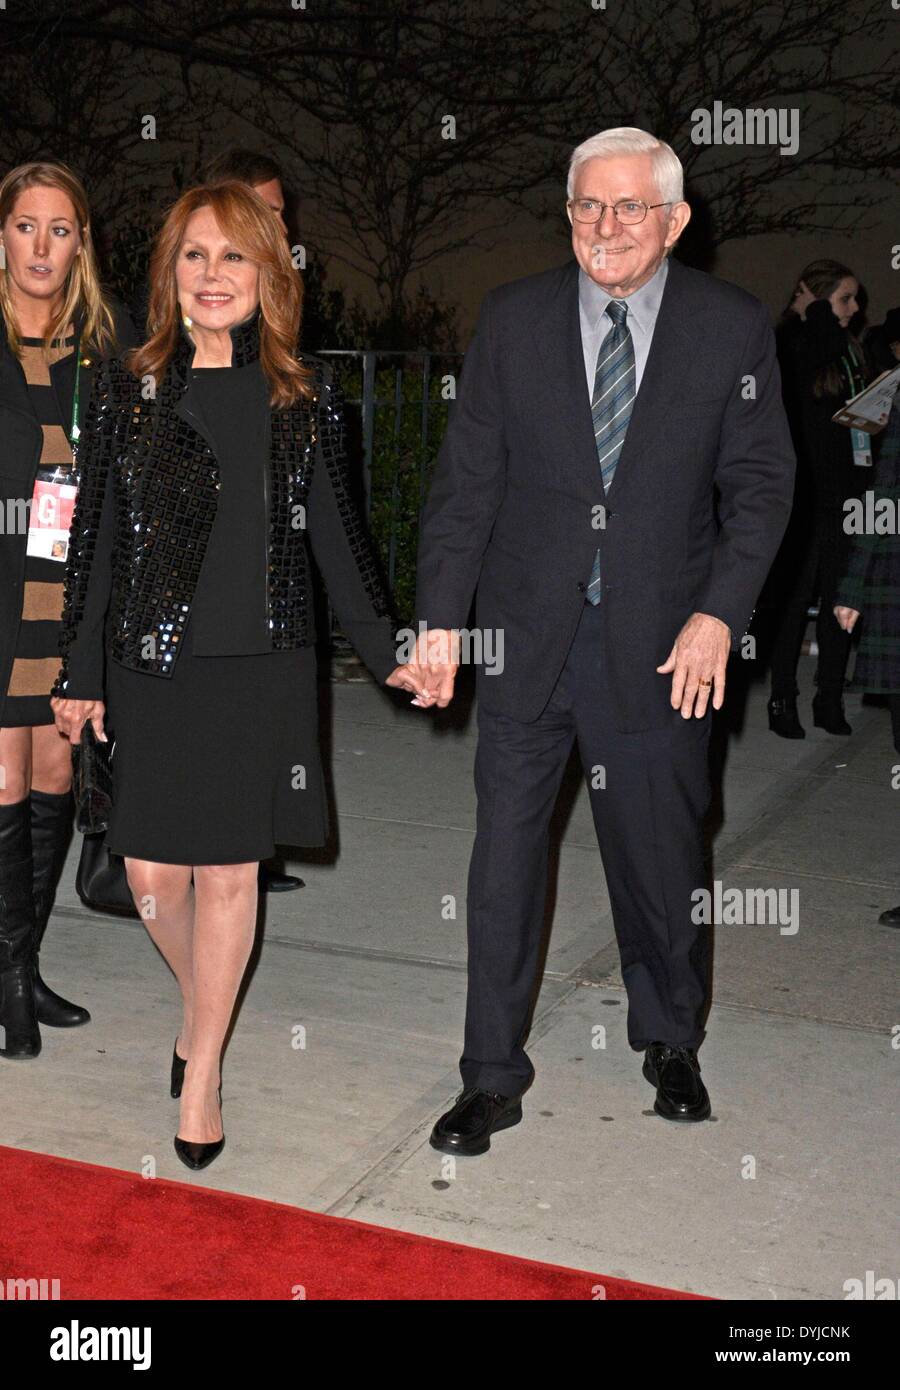 New York, NY, USA. 18th Apr, 2014. Phil Donahue, Marlo Thomas at arrivals for ALL ABOUT ANN Premiere at 2014 Tribeca Film Festival, The School of Visual Arts (SVA) Theatre, New York, NY April 18, 2014. Credit:  Derek Storm/Everett Collection/Alamy Live News Stock Photo